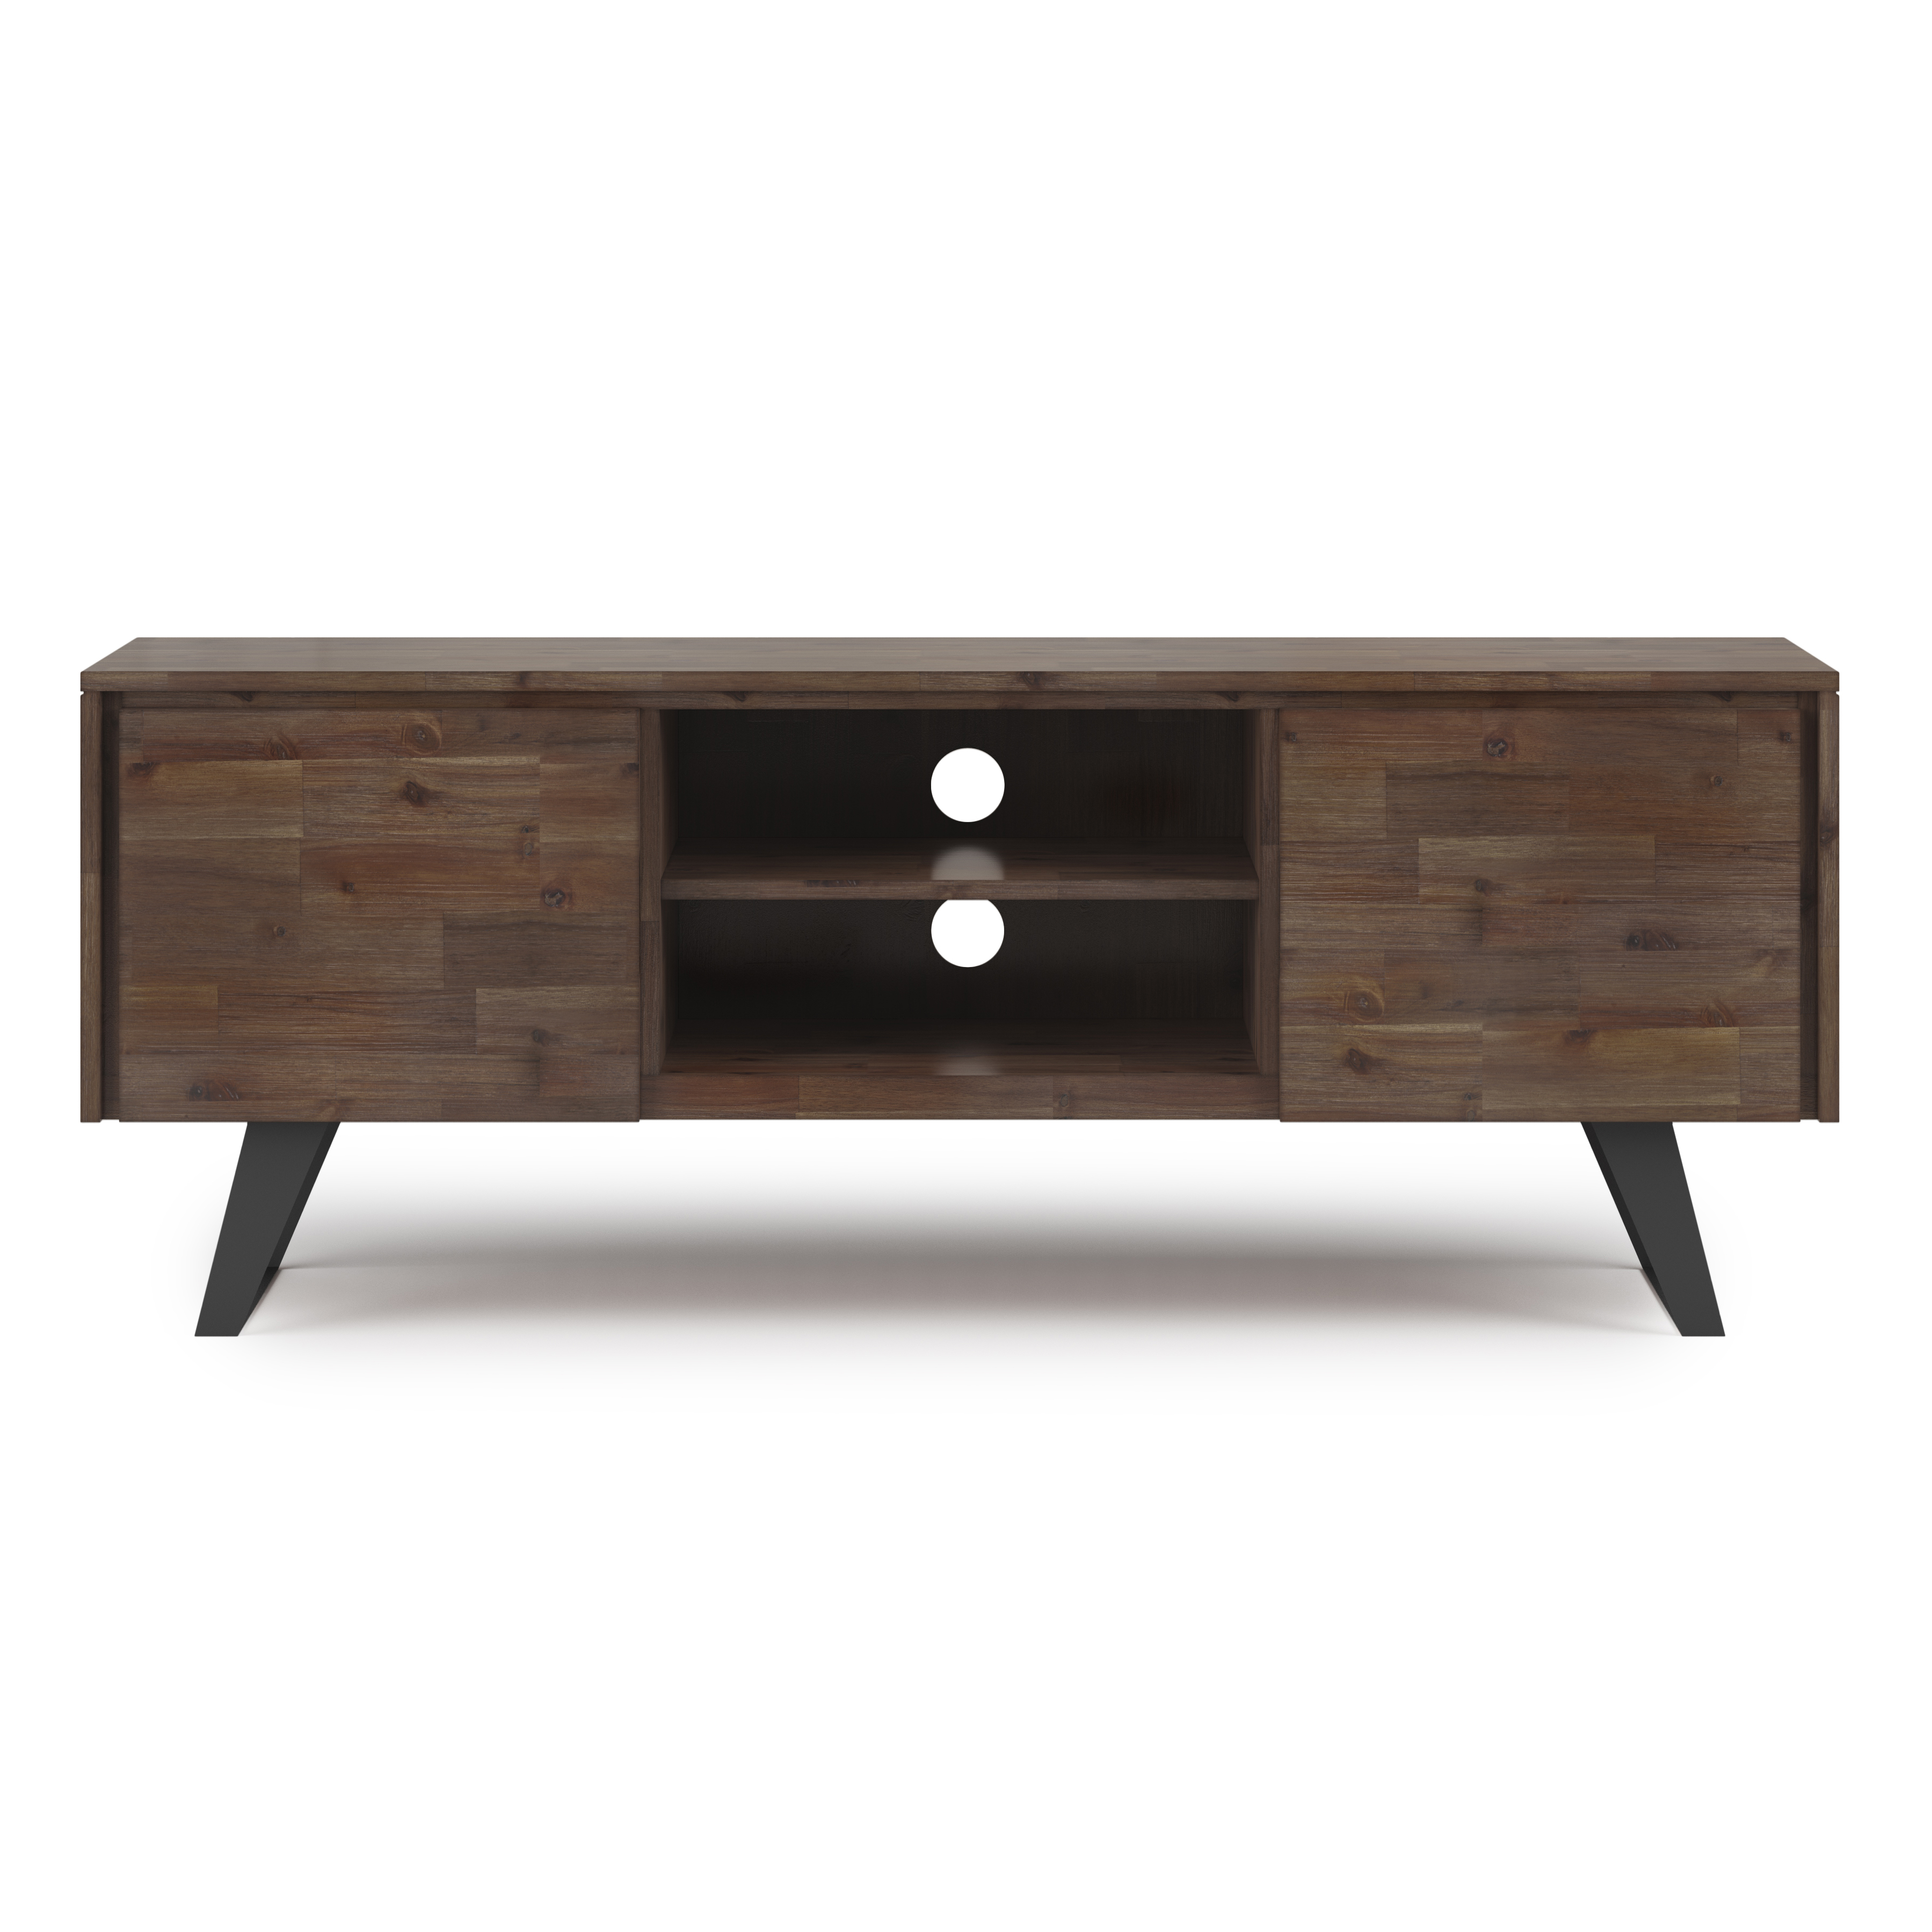 Simpli Home Lowry 63" Solid Wood Modern TV Stand in Rustic Aged Brown - image 3 of 13